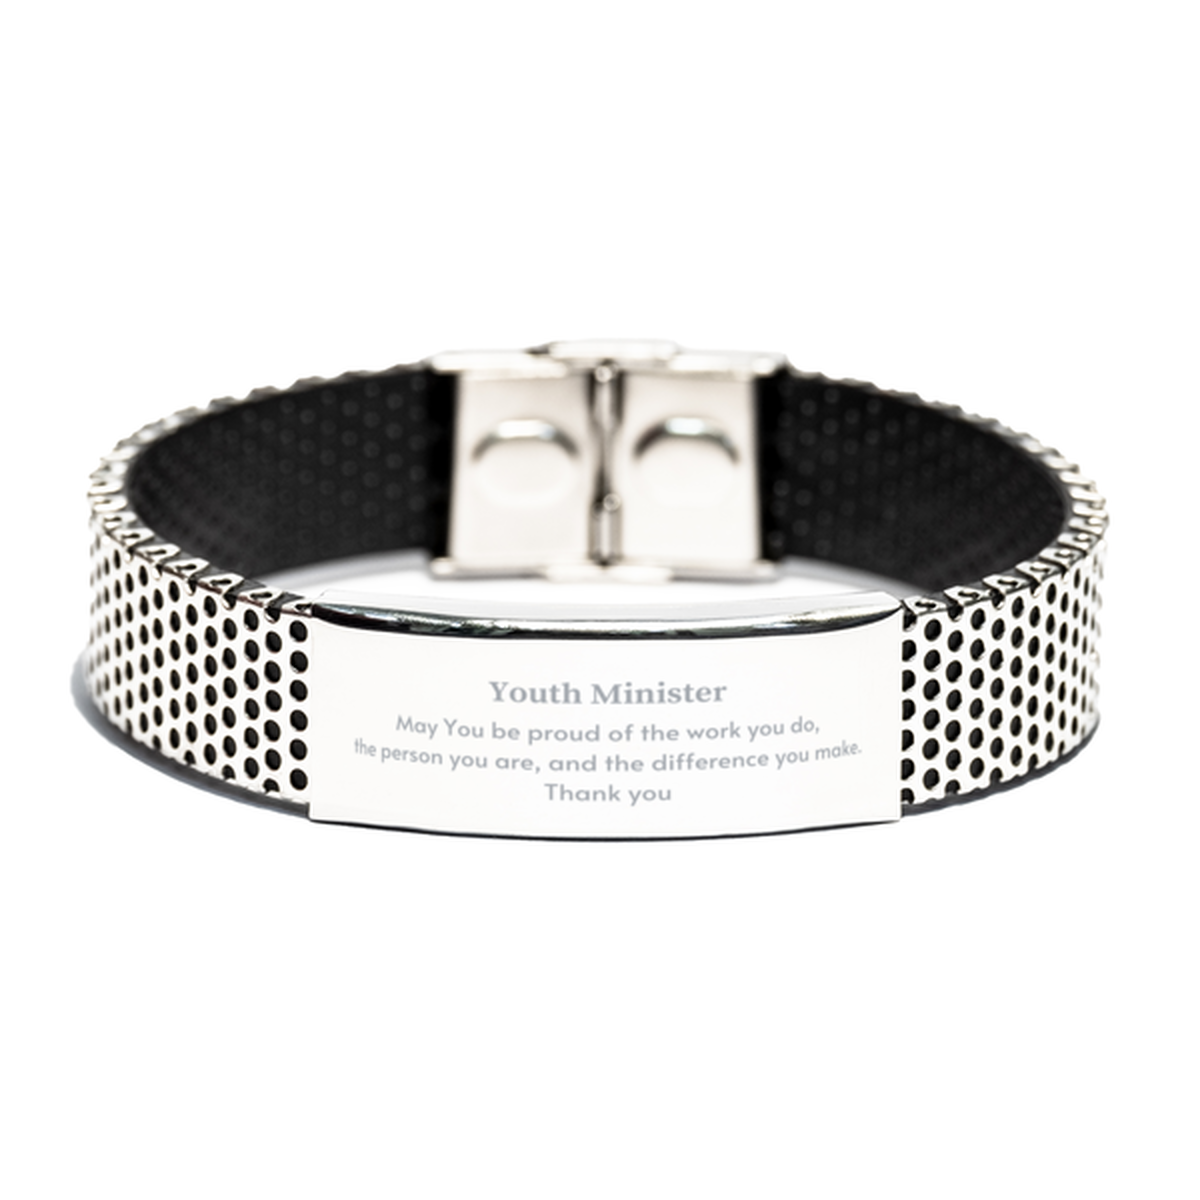 Heartwarming Stainless Steel Bracelet Retirement Coworkers Gifts for Youth Minister, Youth Minister May You be proud of the work you do, the person you are Gifts for Boss Men Women Friends